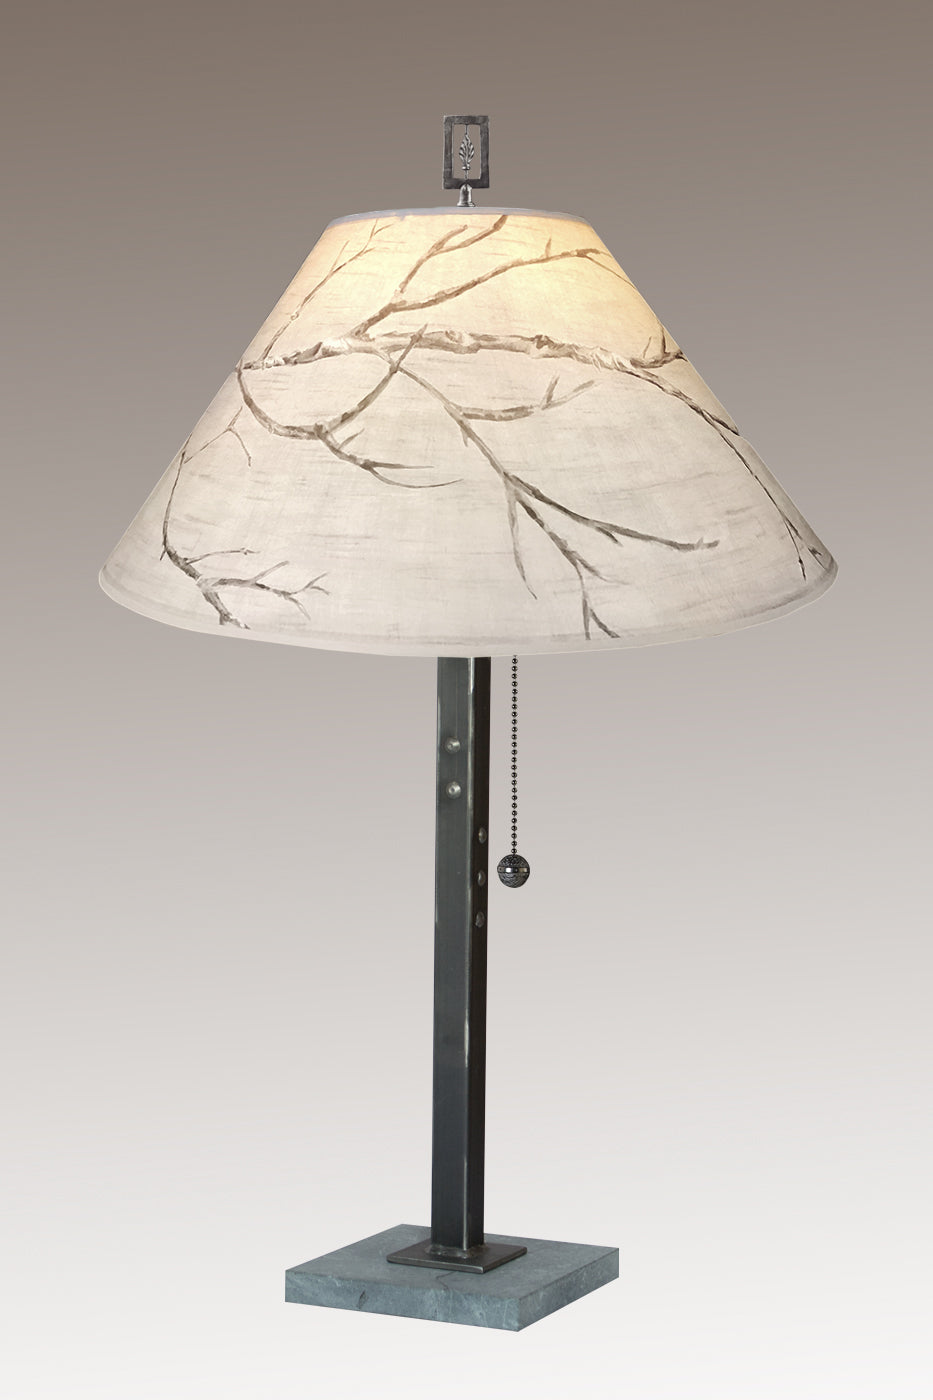 Janna Ugone & Co Table Lamps Steel Table Lamp with Large Conical Shade in Sweeping Branch